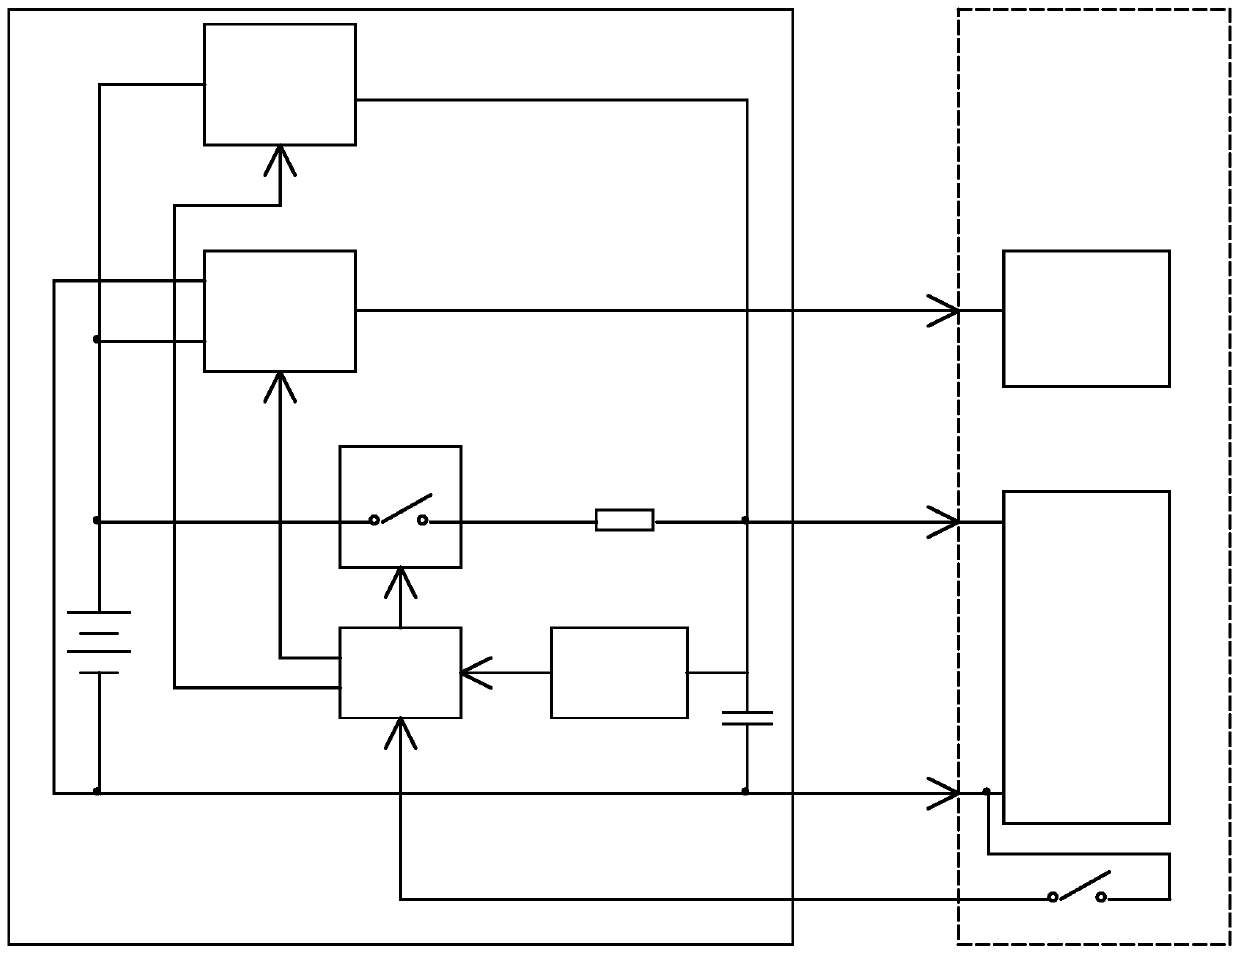 Super-capacitor and battery parallel control system